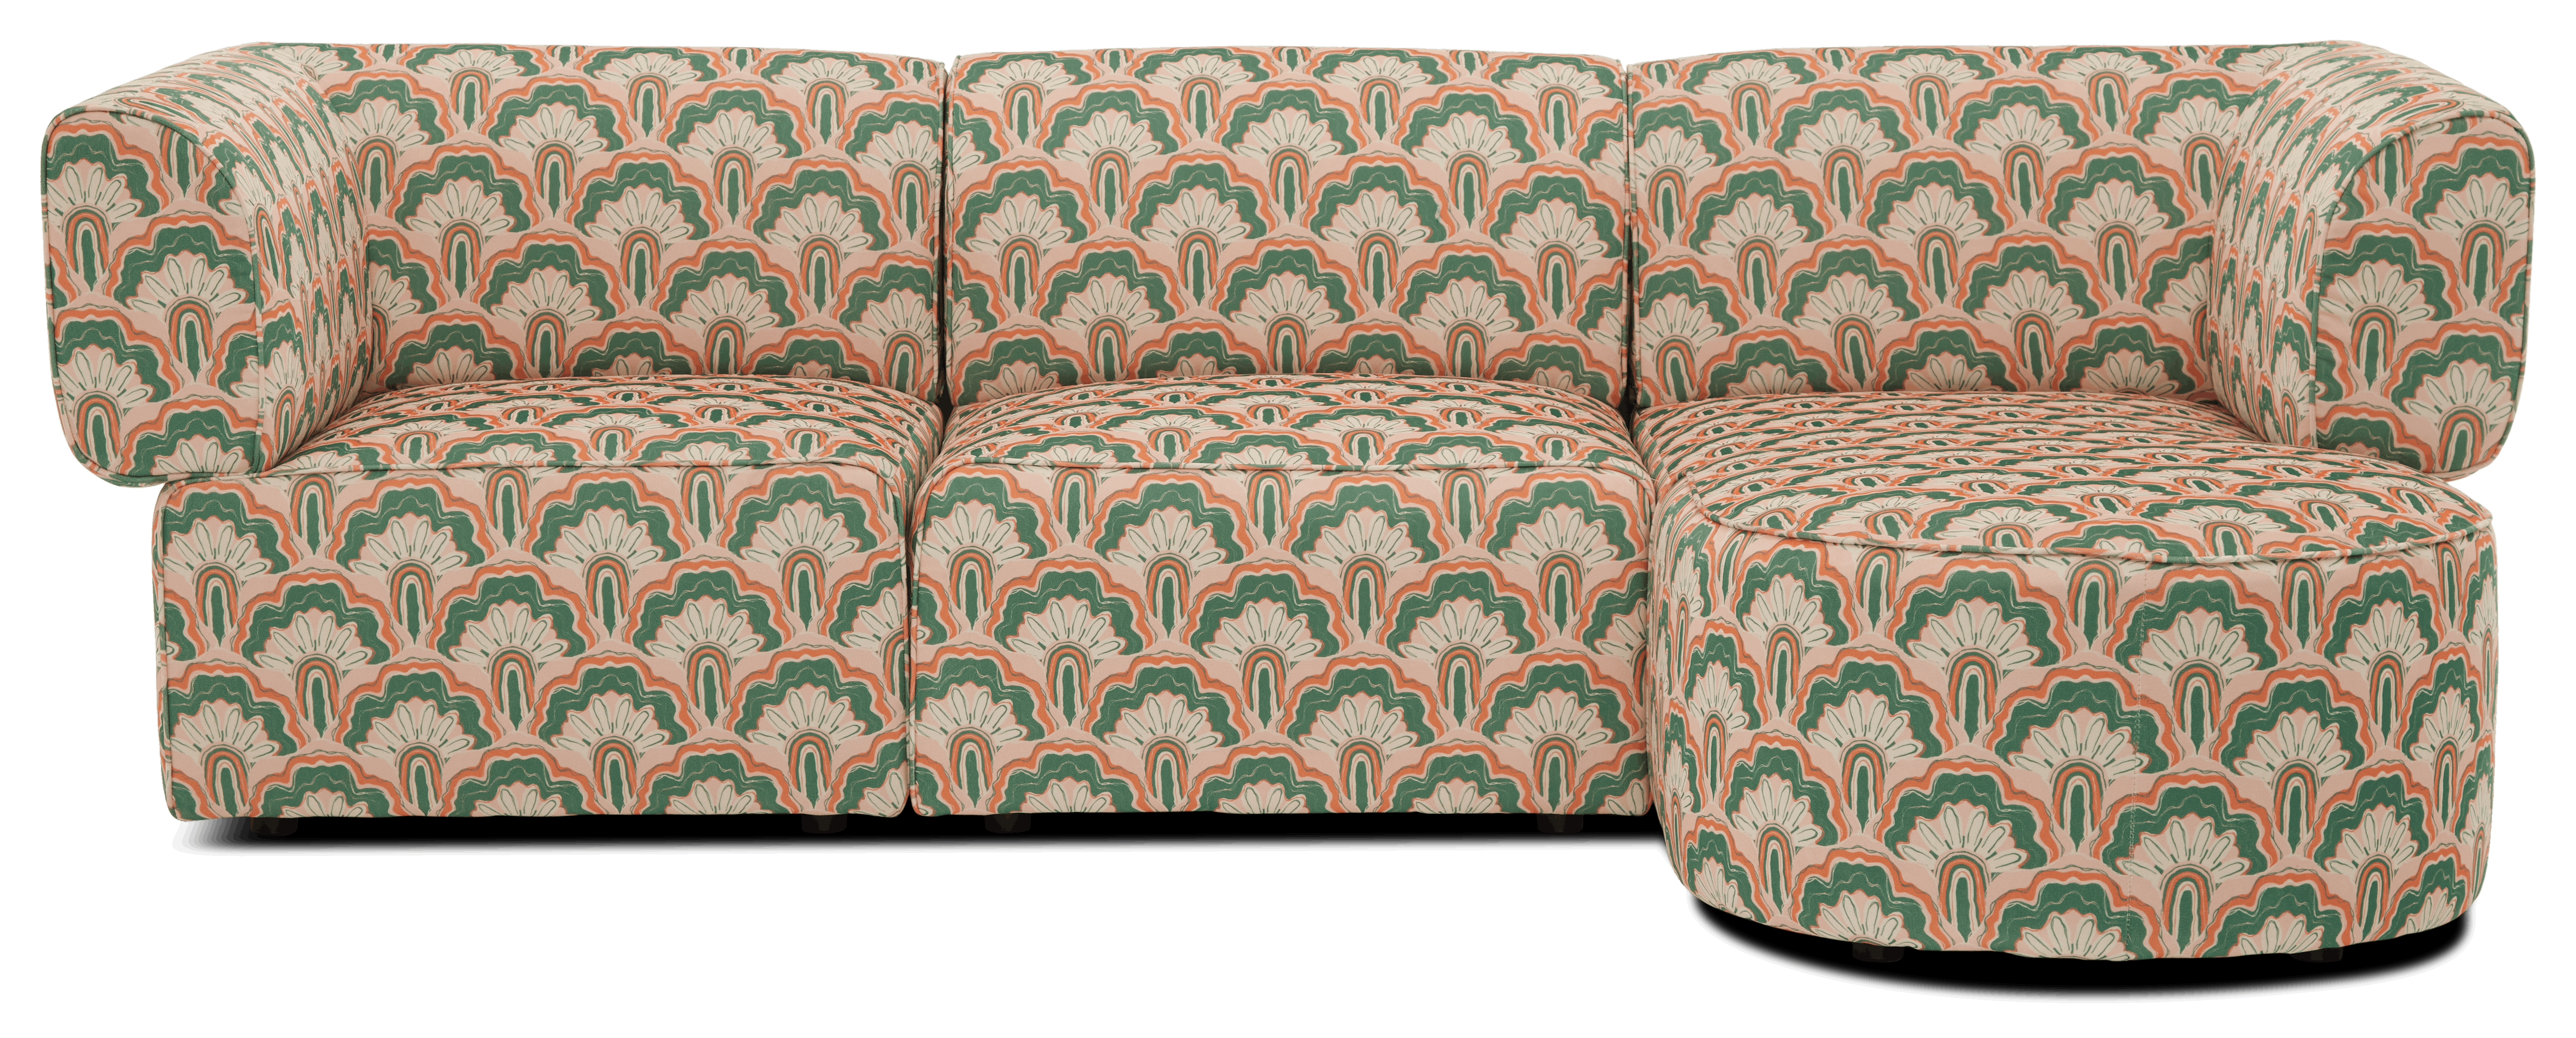 deco peacock diane modular chaise sectional %28limited edition%29 deco peacock